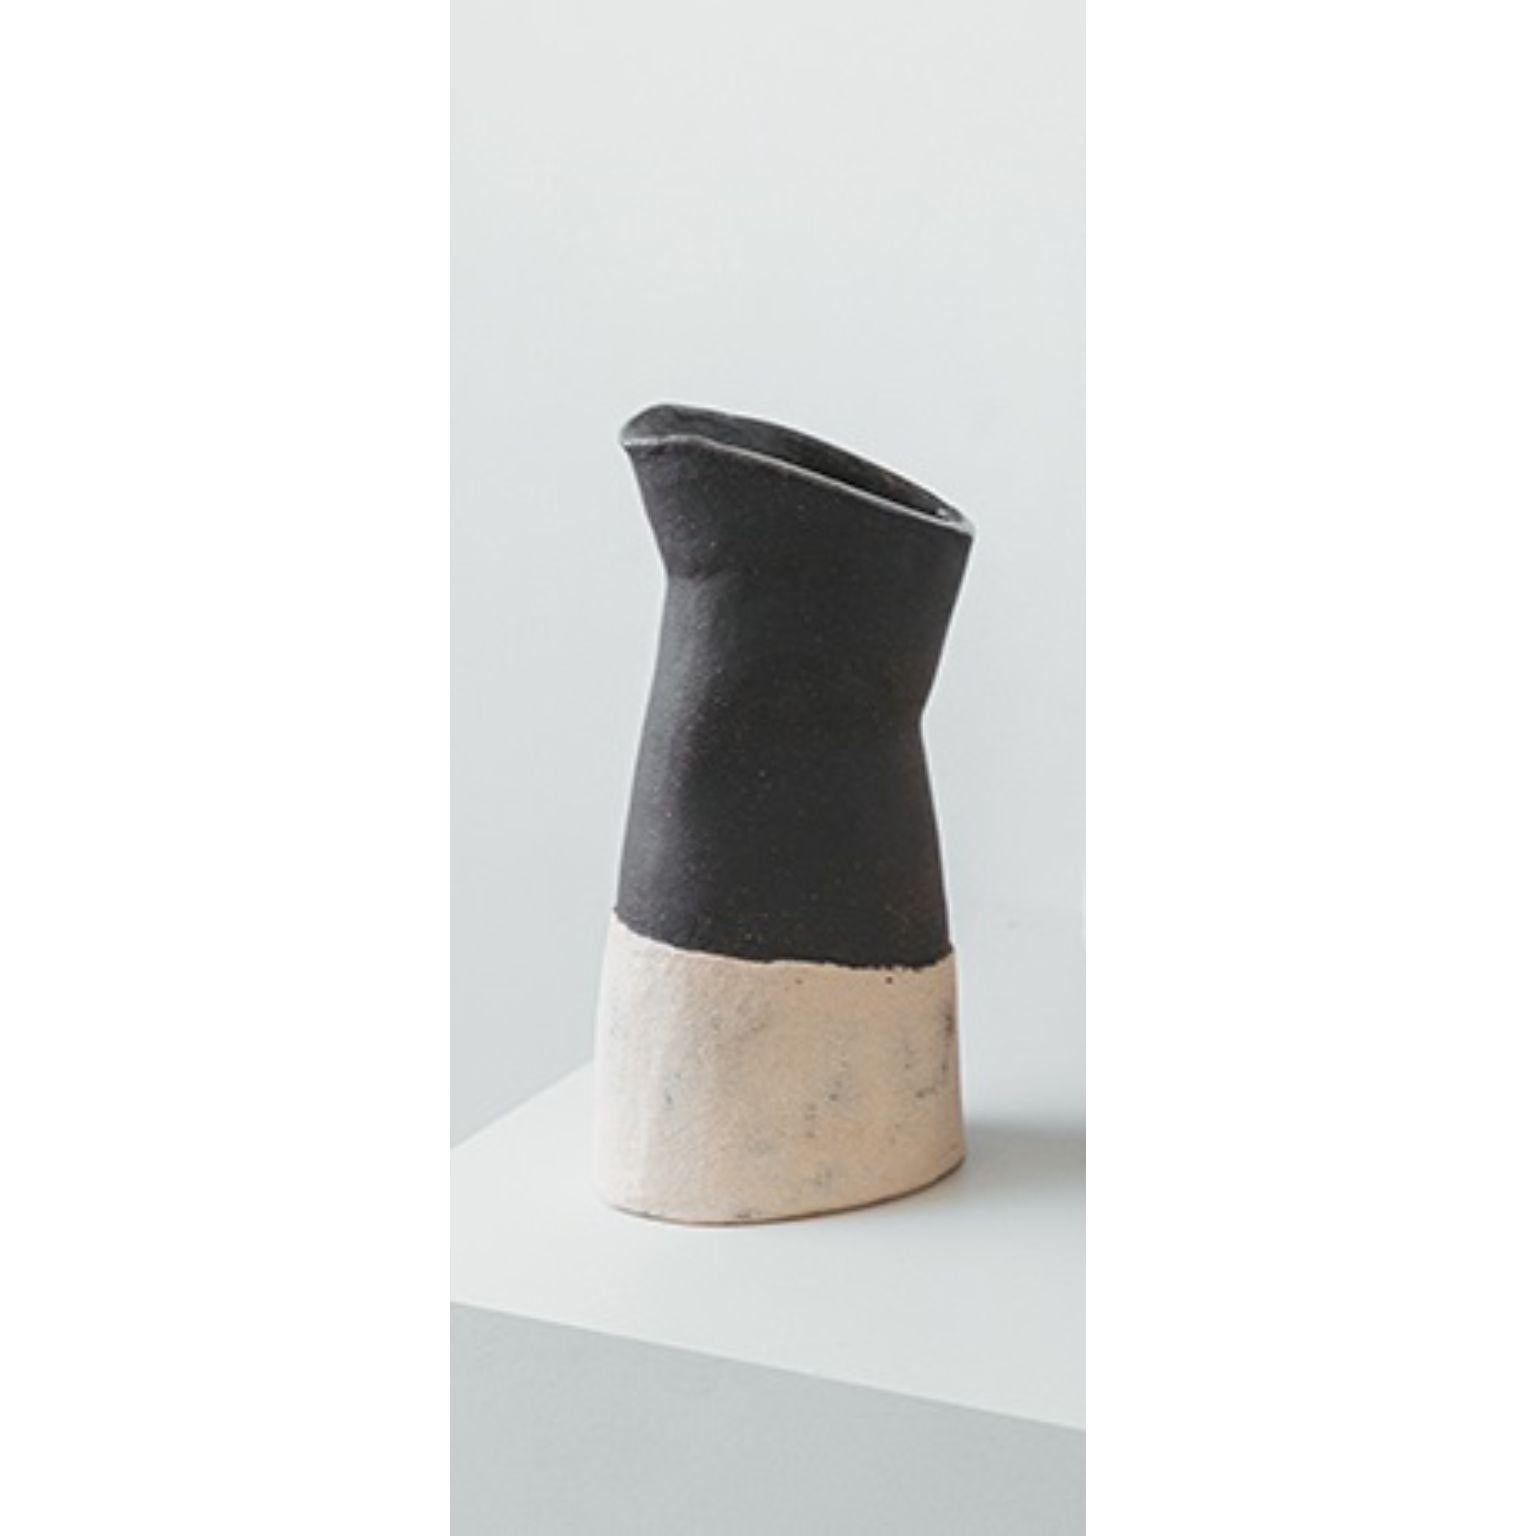 Perséfone Wine Jar by Cuit Studio
One of a Kind.
Dimensions: D 8 x W 12 x H 24 cm.
Materials: Natural and black stoneware.

Mix of natural and black stoneware, glazed inside with transparent color. Water & food safe. Handmade in Barcelona. Also